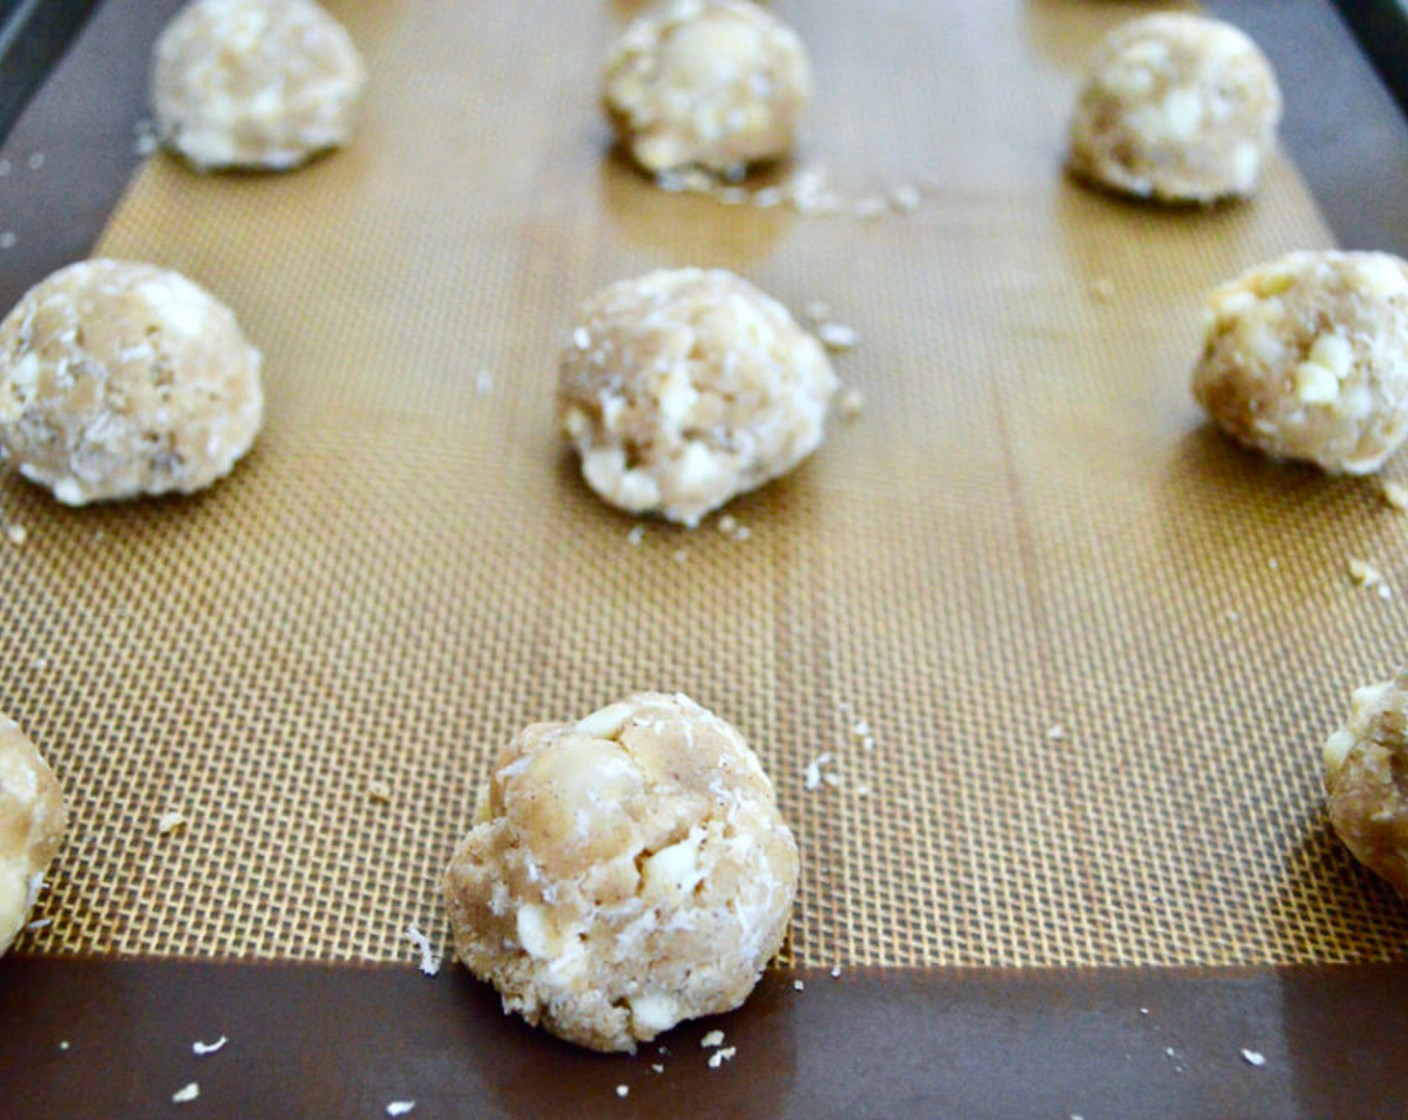 step 8 Scoop the dough into small mounds and roll them into balls the size of your palm. Line them up on the sheet trays, leaving some room to let them spread.